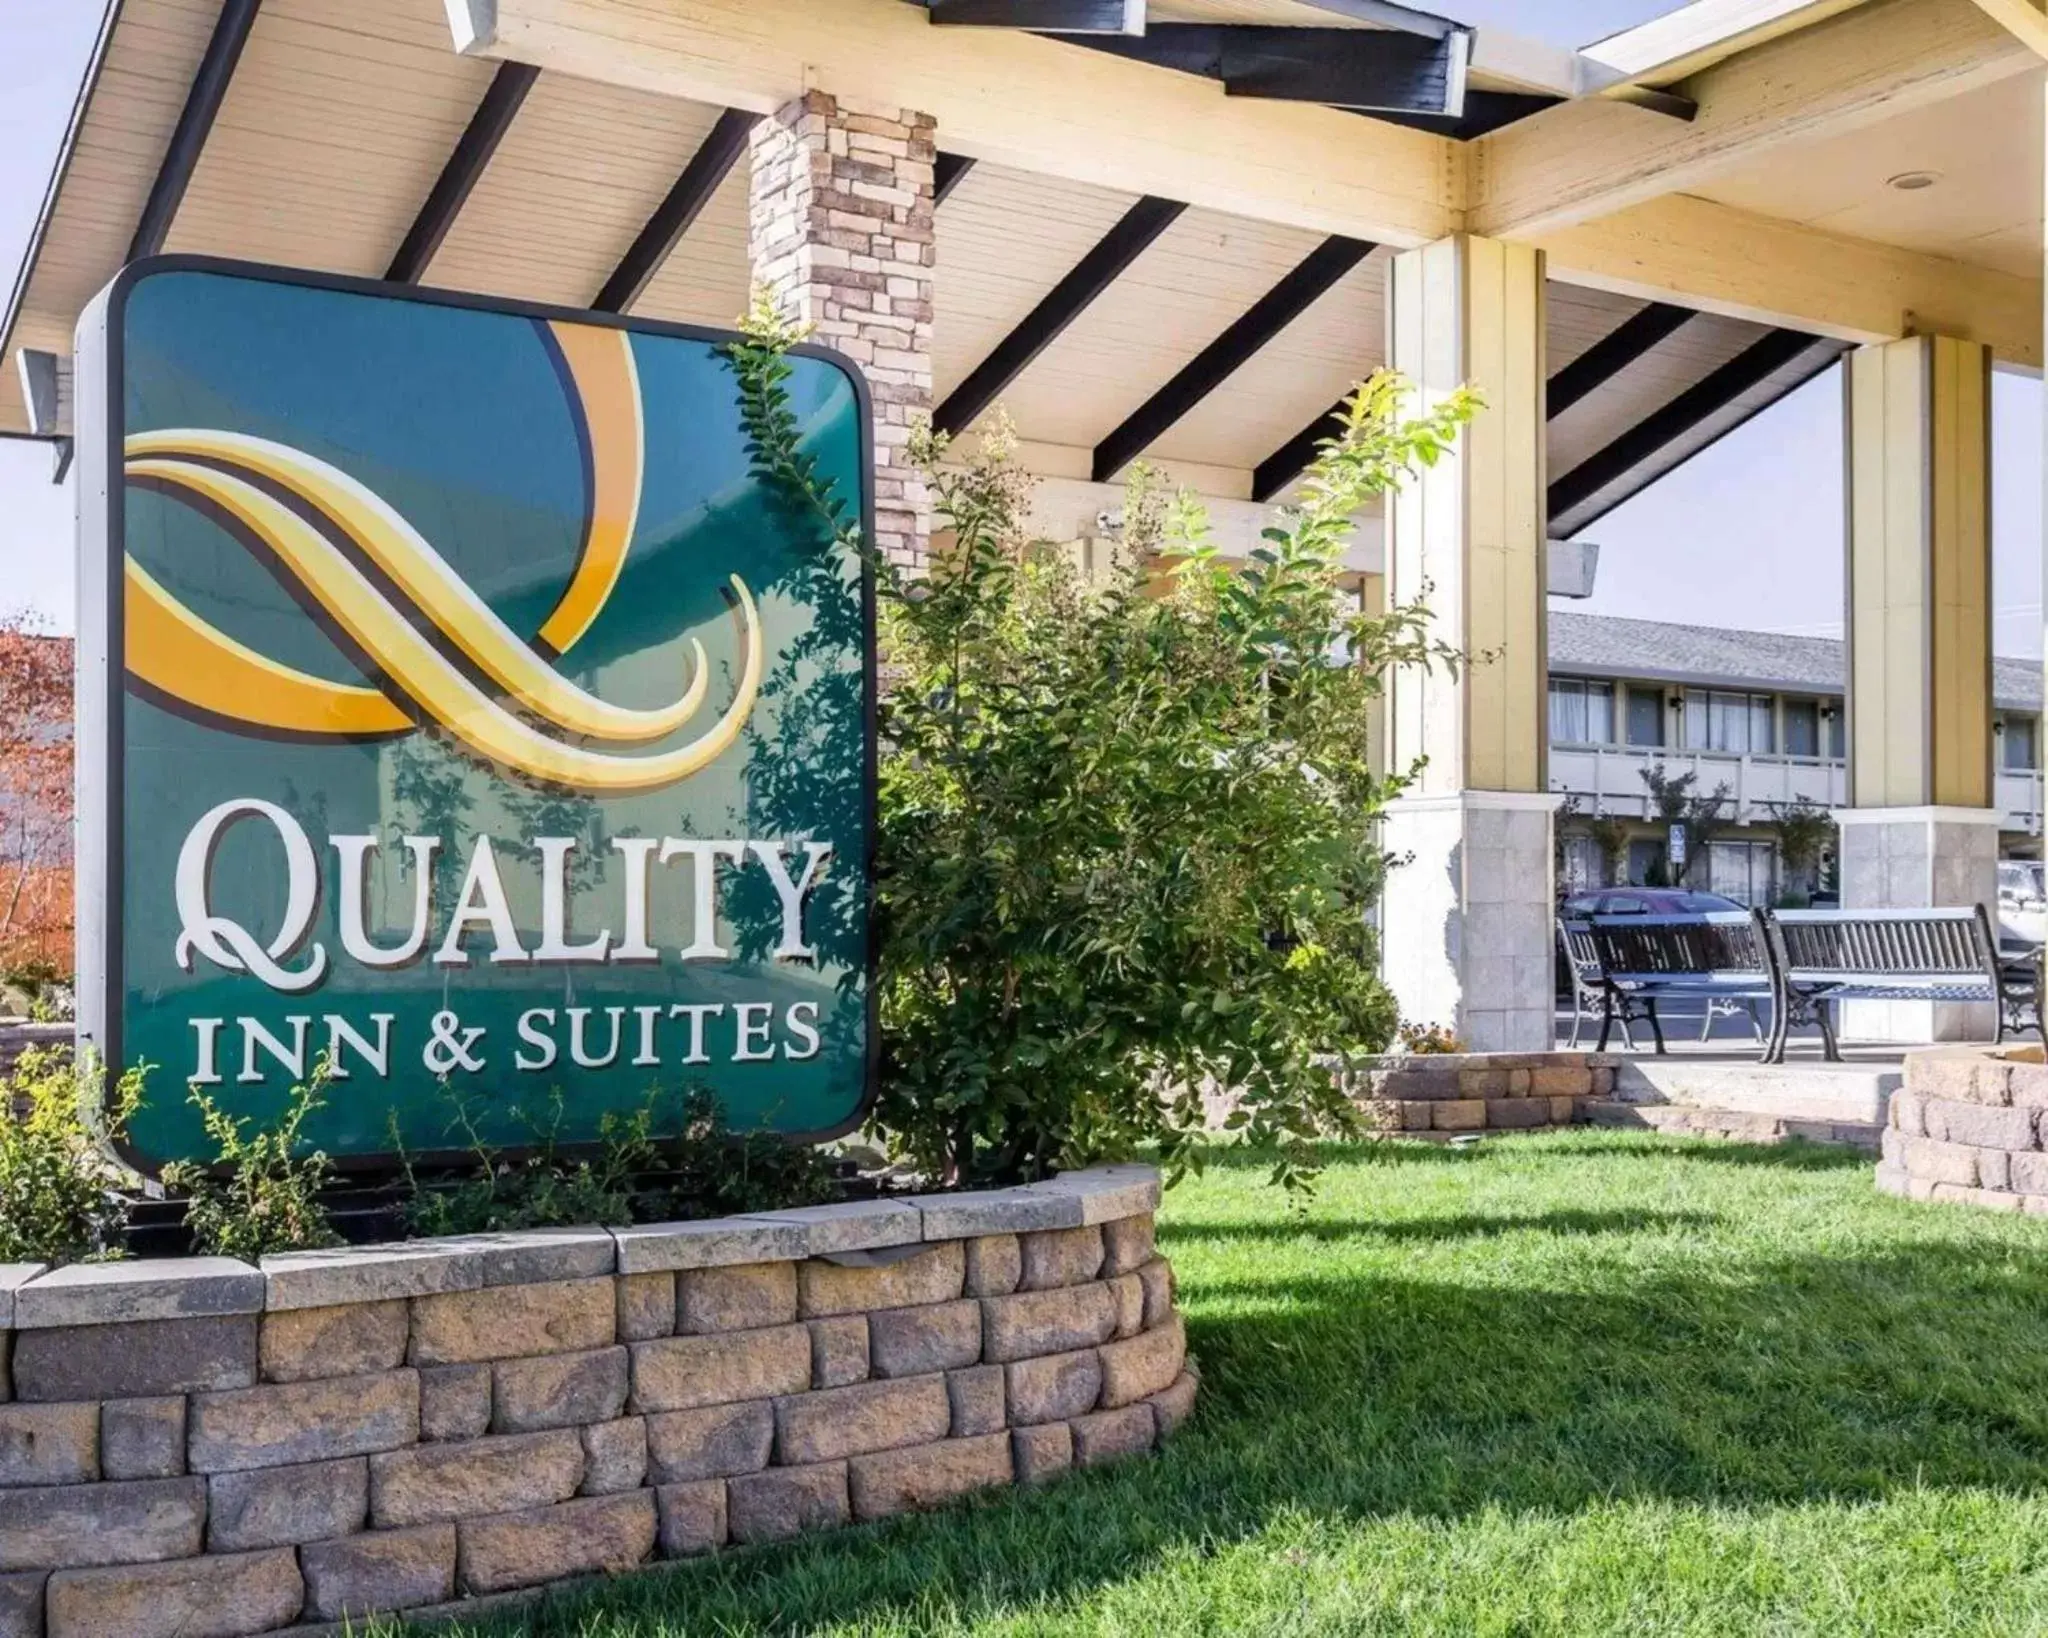 Property building in Quality Inn & Suites Cameron Park Shingle Springs